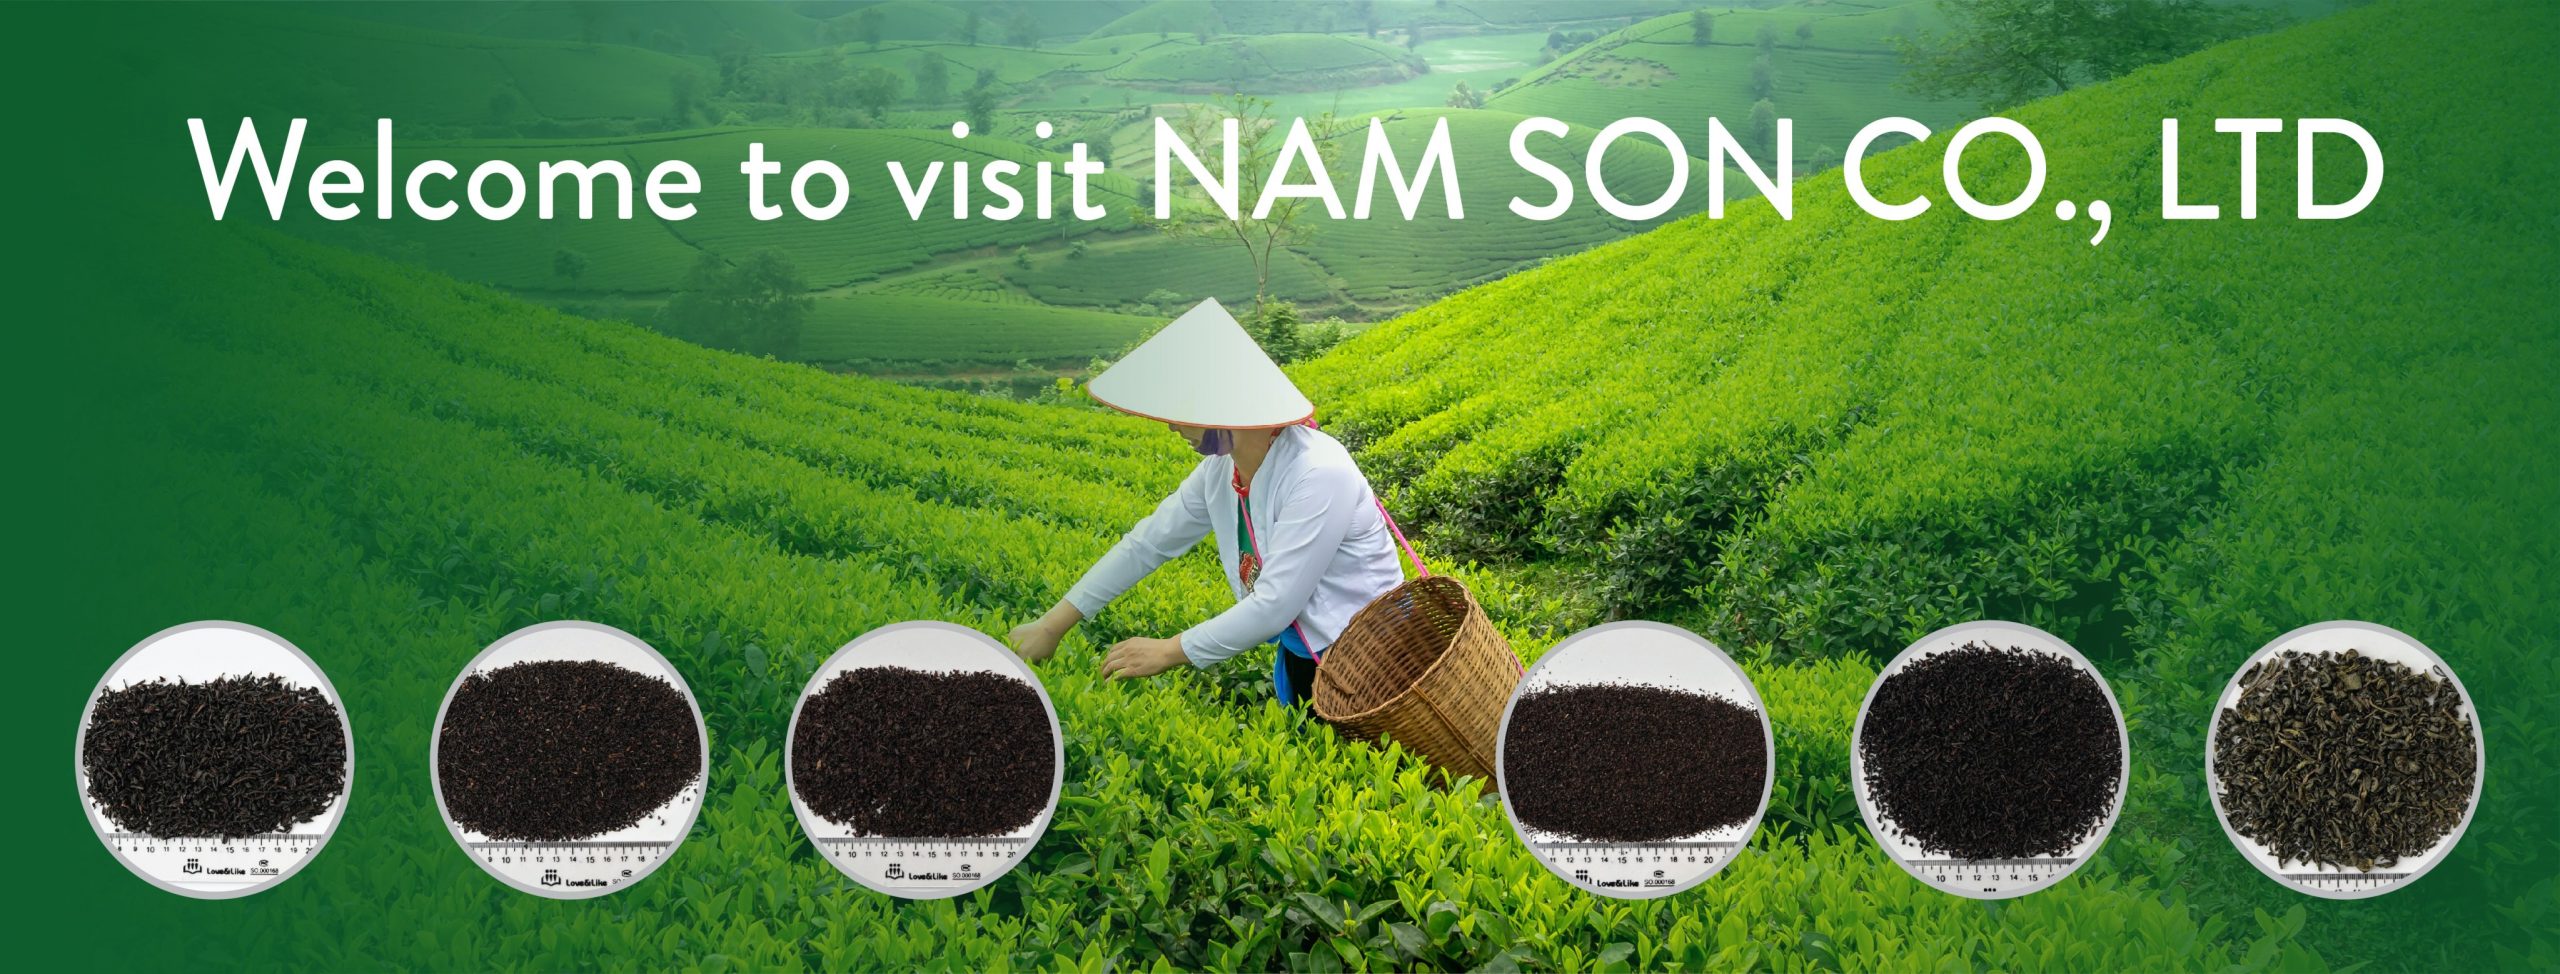 Welcome to visit Nam Son Co.,Ltd